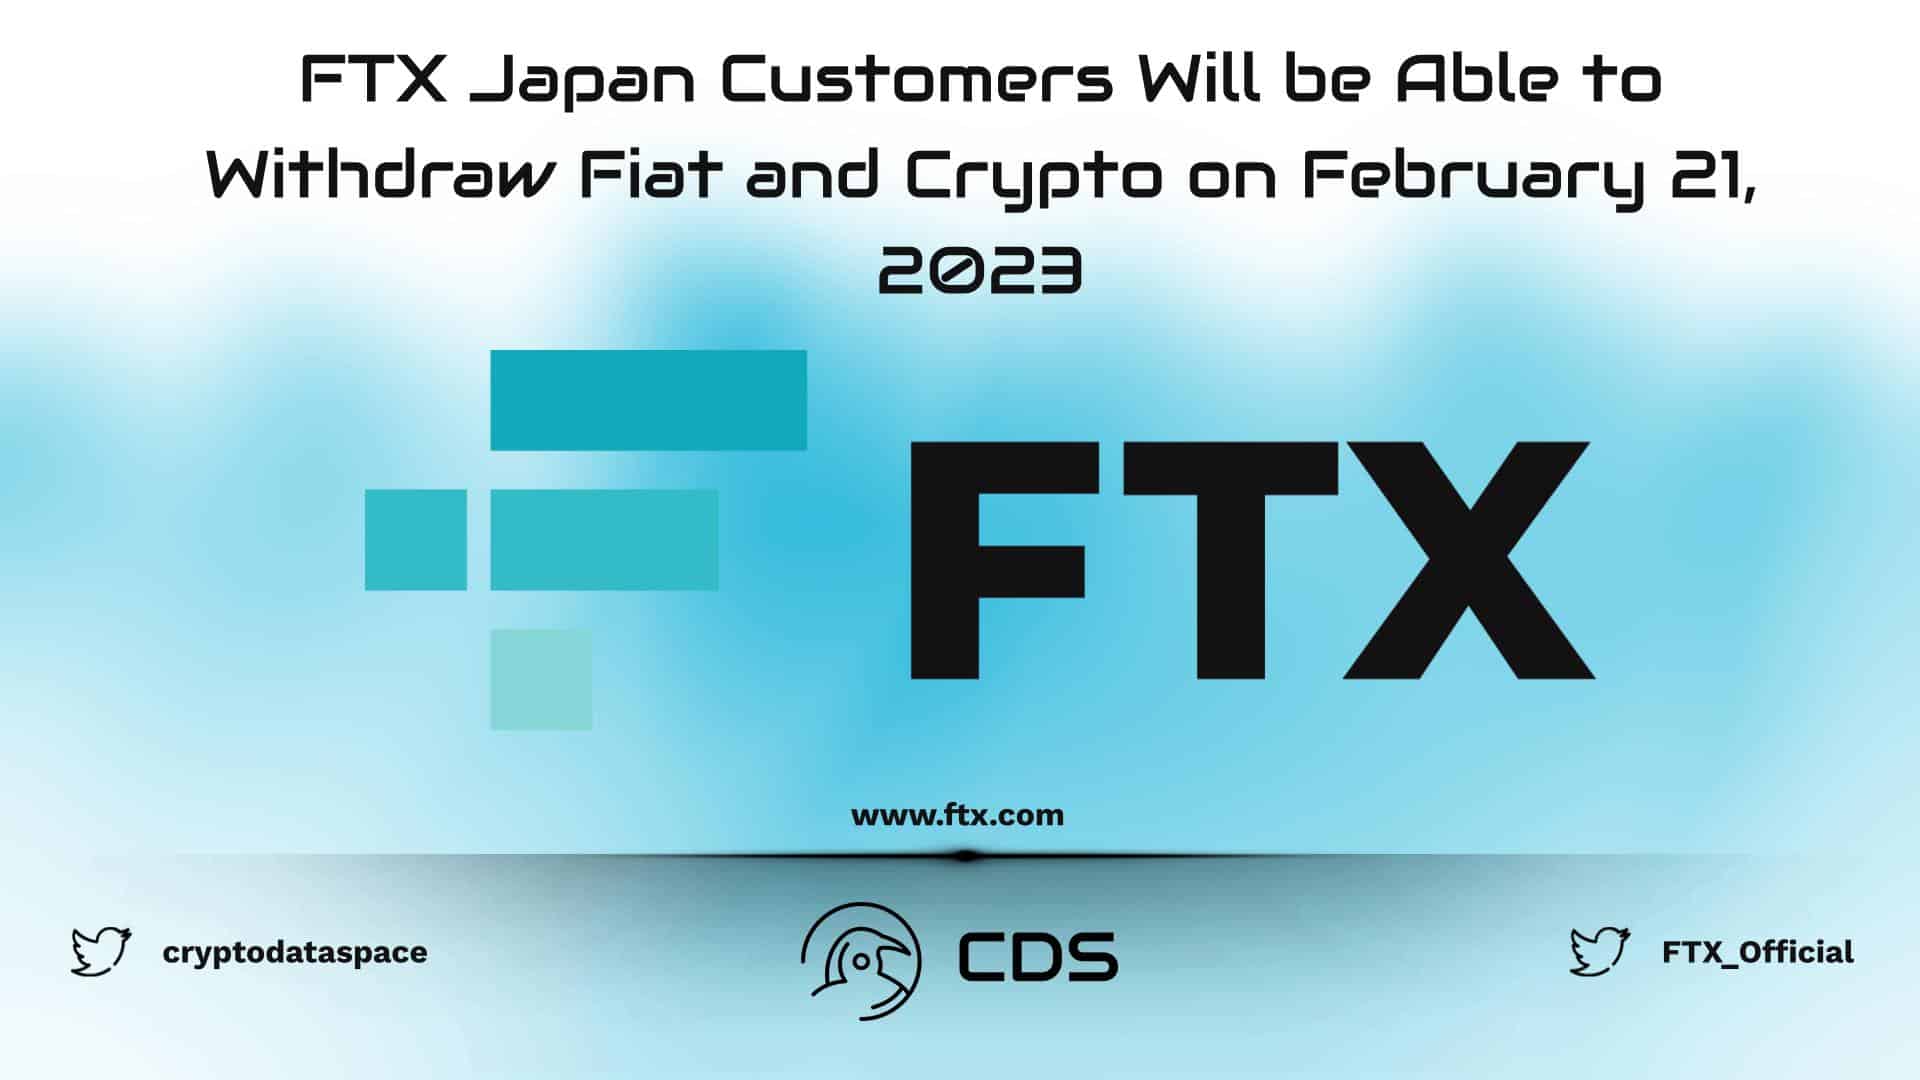 FTX Japan Customers Will be Able to Withdraw Fiat and Crypto on February 21, 2023